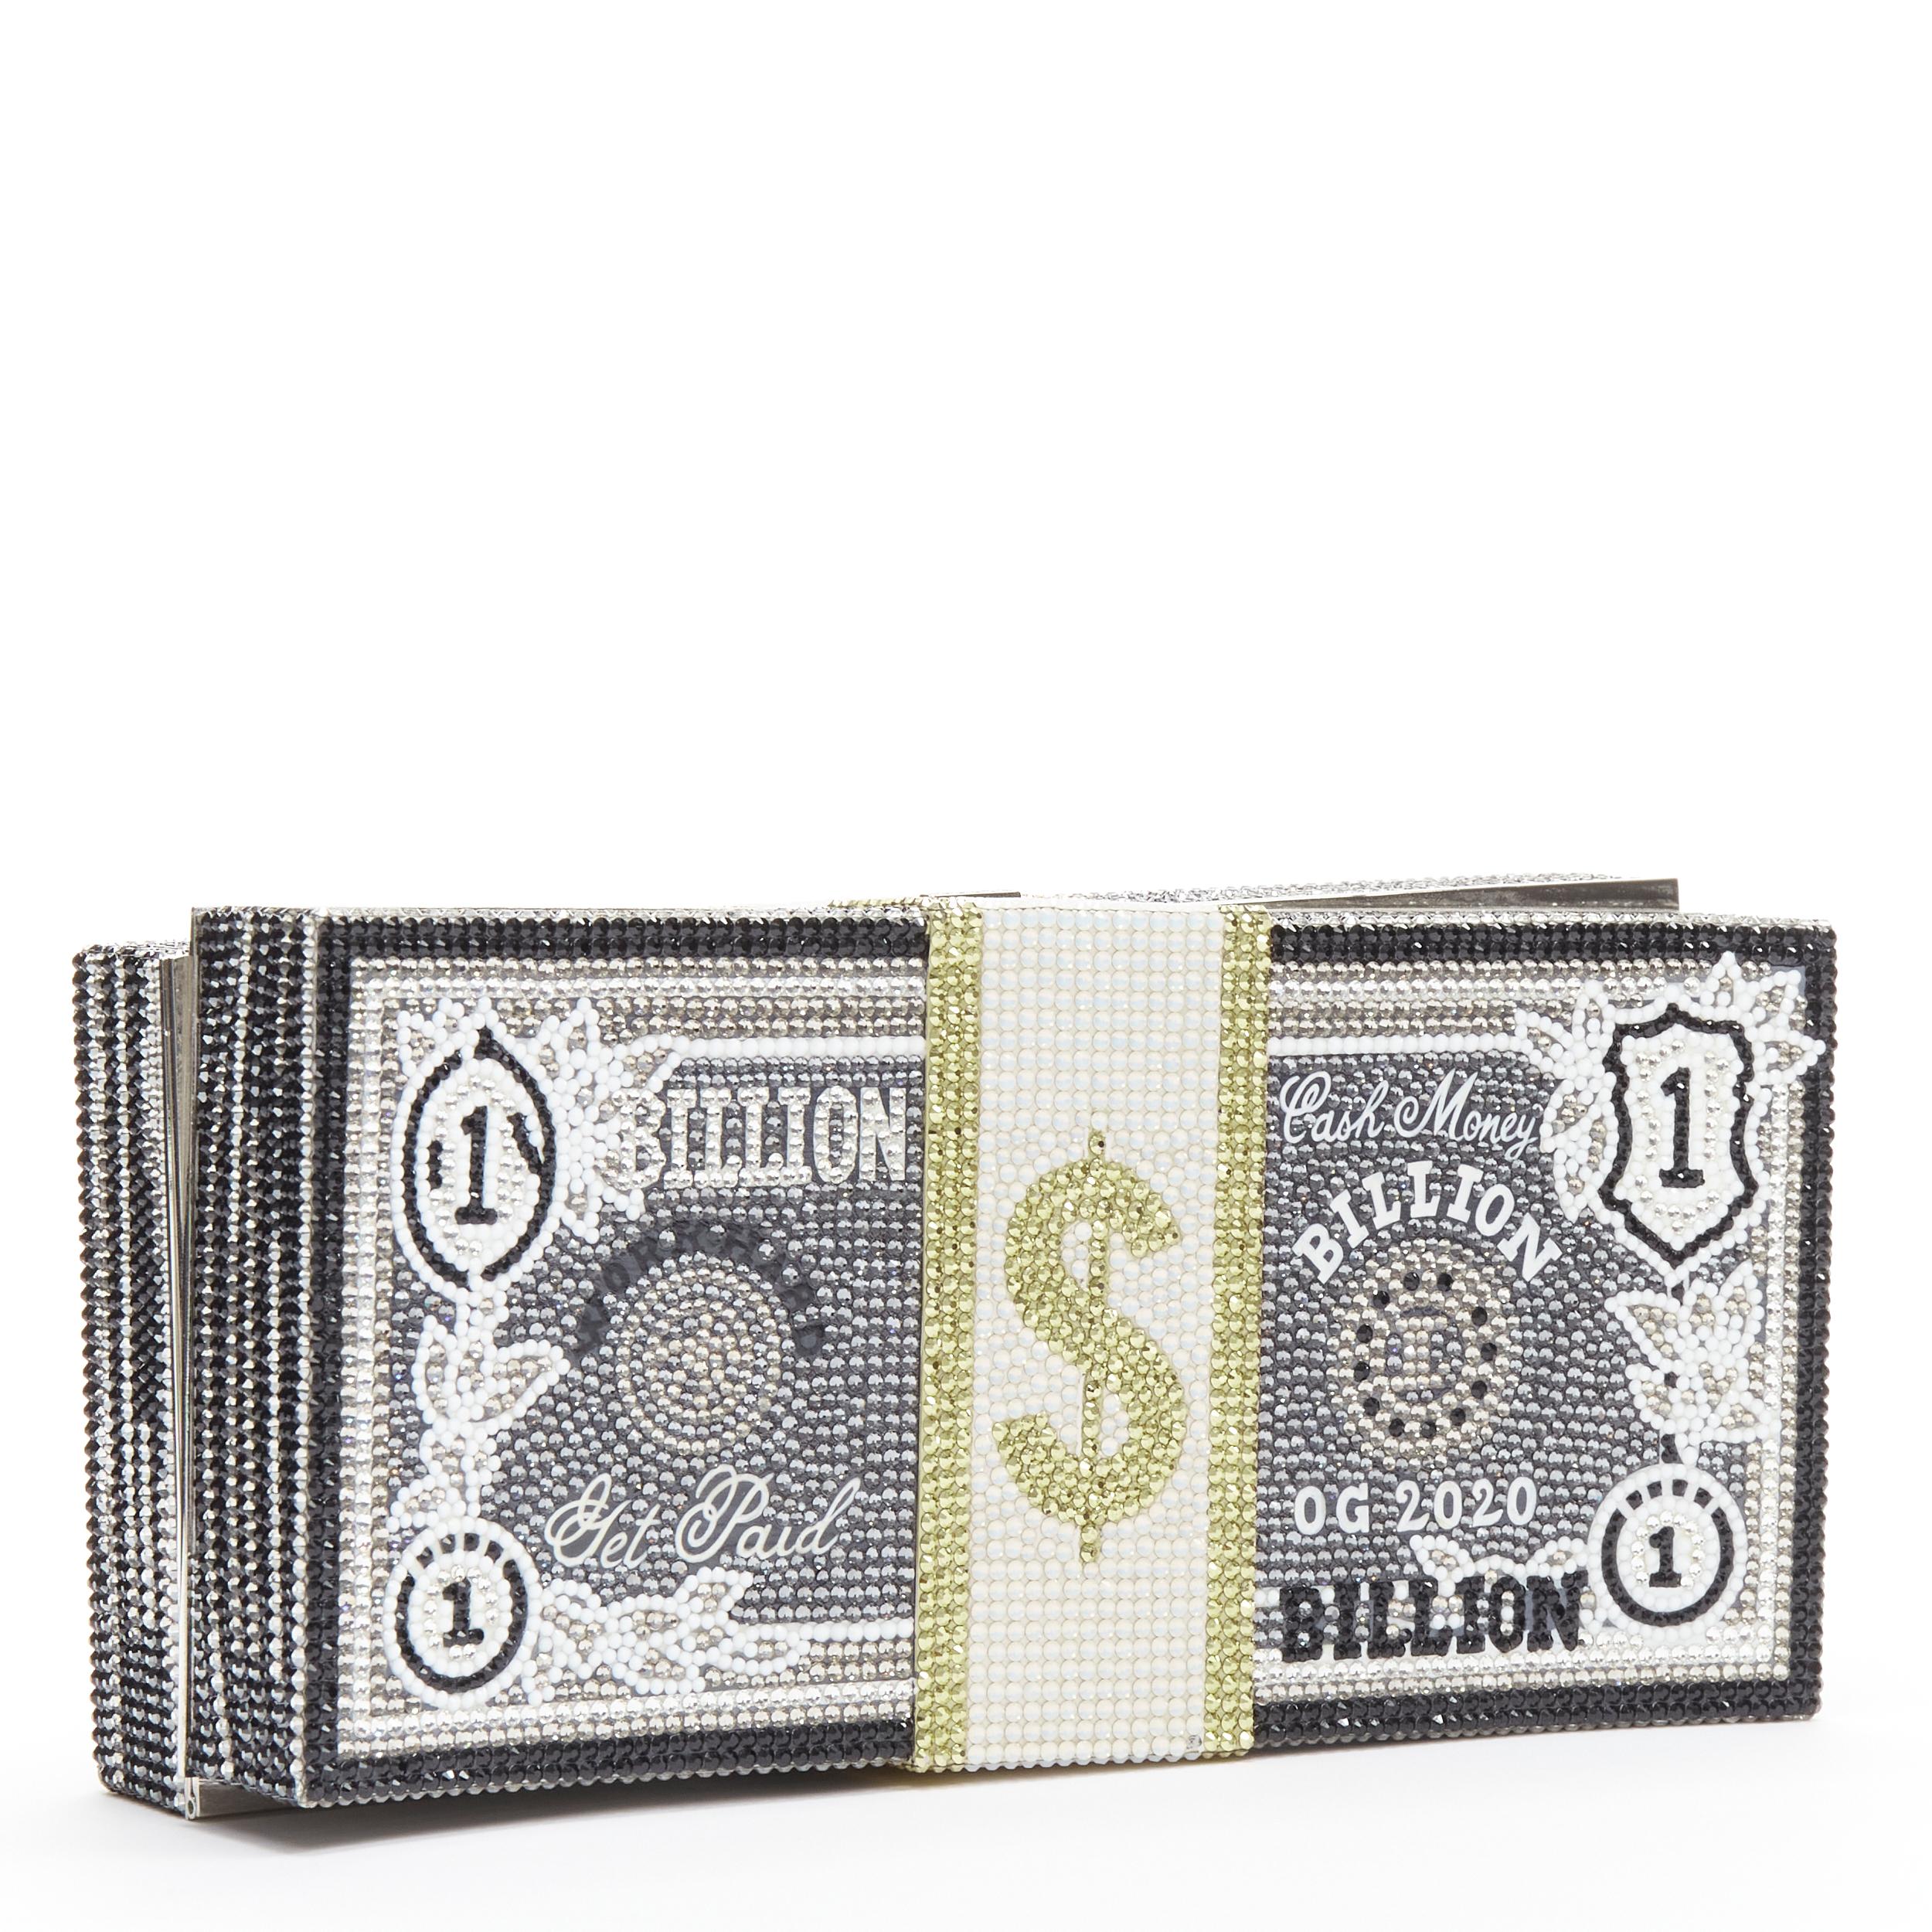 rare JUDITH LEIBER COUTURE Stack Of Cash Billion rhinestone crystals clutch bag
Brand: Judith Leiber
Model: Billion stack of cash
As seen on: Beyonce, Jennifer Lopez, Kris Jenner
Material: Metal
Color: Black
Pattern: Abstract
Closure: Push